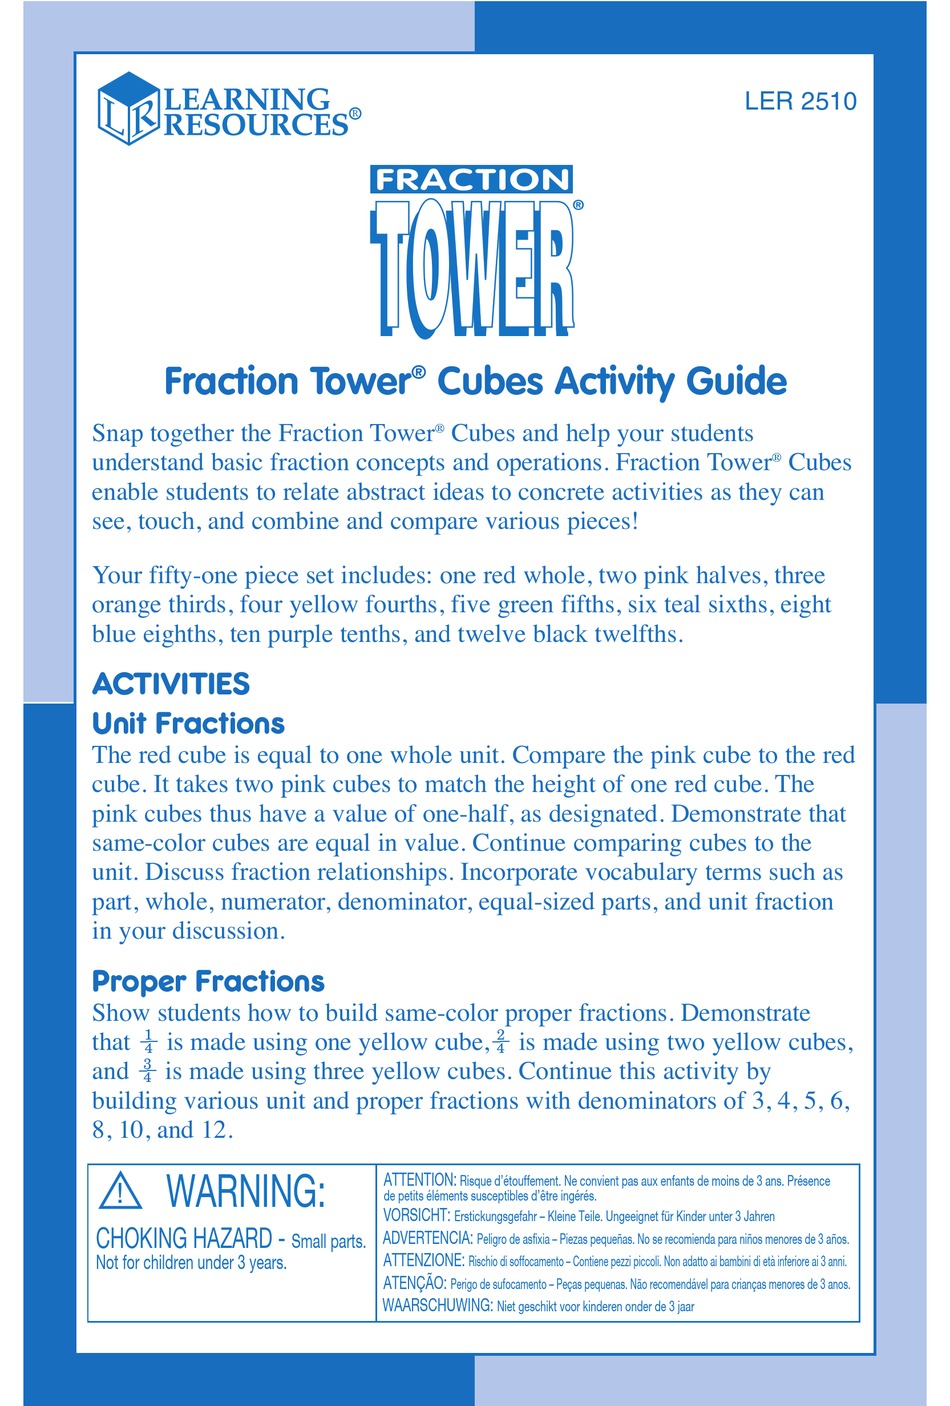 Details about   LOT OF 6 Packages Learning Resources Fraction Tower Equivalency Cubes LER 2509 